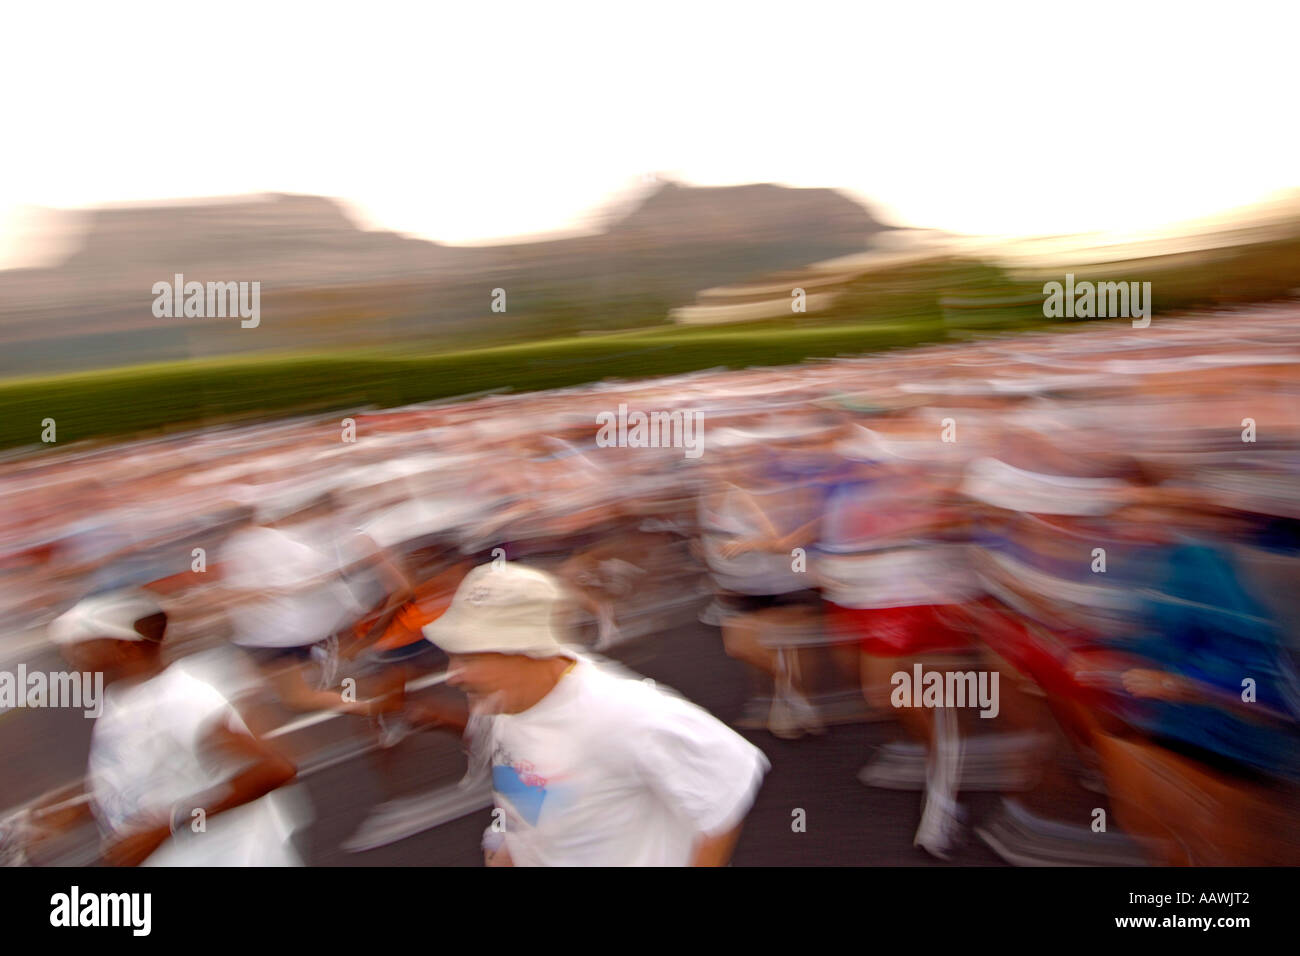 Start of the 2006 Old Mutual Two Oceans marathon in Cape Town, South Africa. Stock Photo